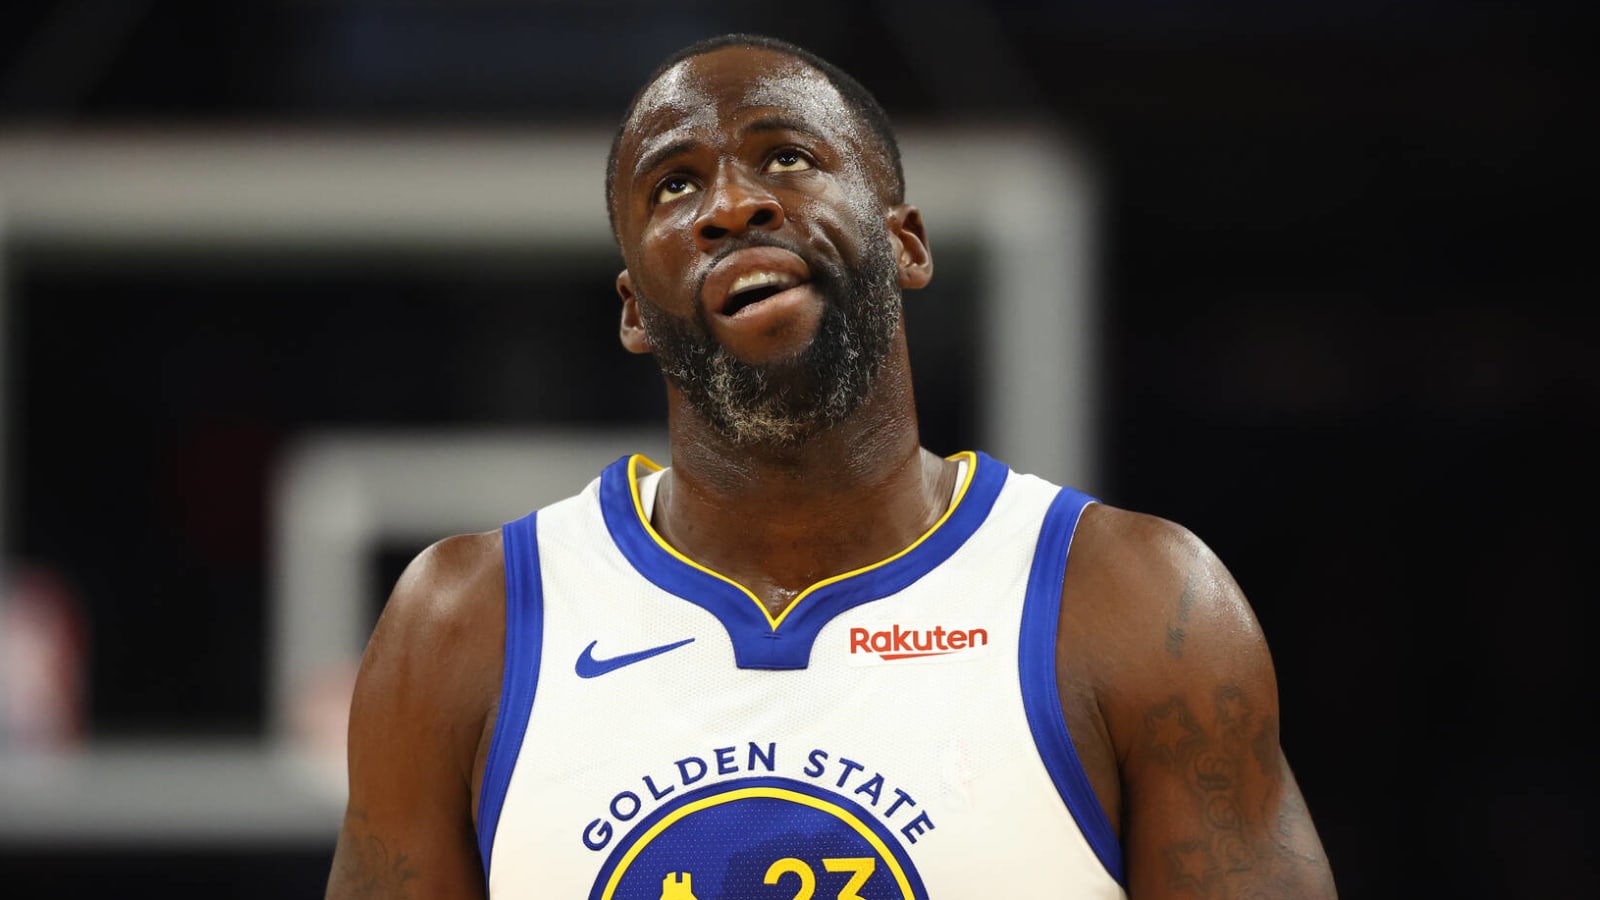 Report indicates when Draymond Green’s suspension is expected to end